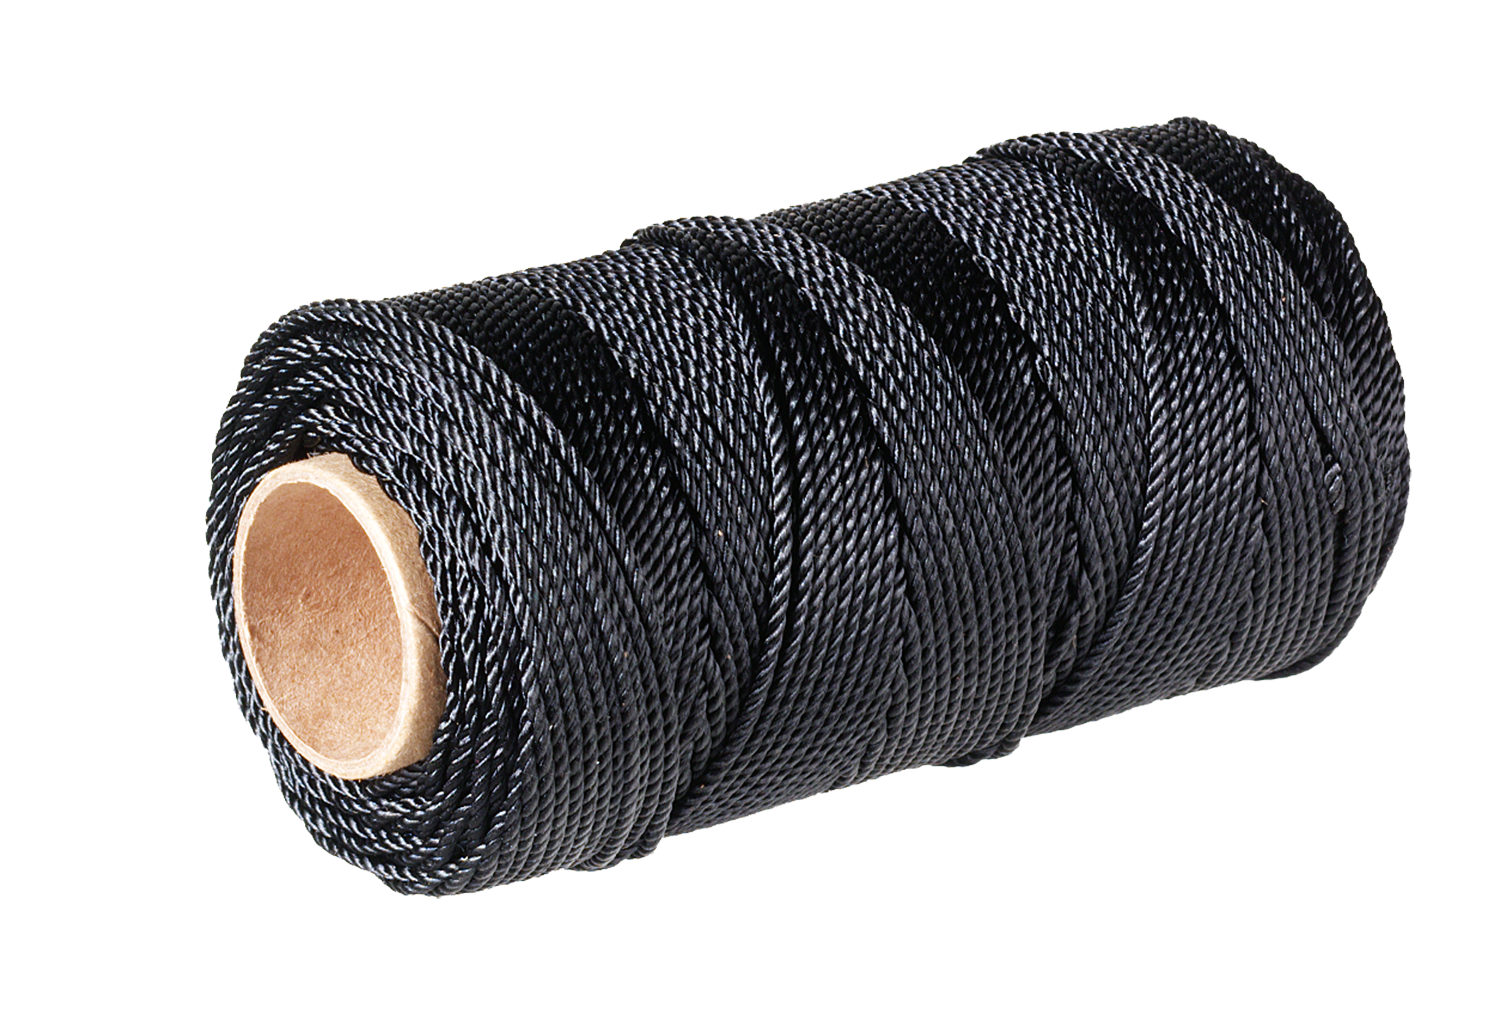  Texas Bushcraft Tarred Bank Line Twine - #36 Black Nylon String  for Fishing, Camping and Outdoor Survival – Strong, Weather Resistant  Bankline Cordage for Trotline (1 lb - #36 (525 ft), Braided) : Sports &  Outdoors